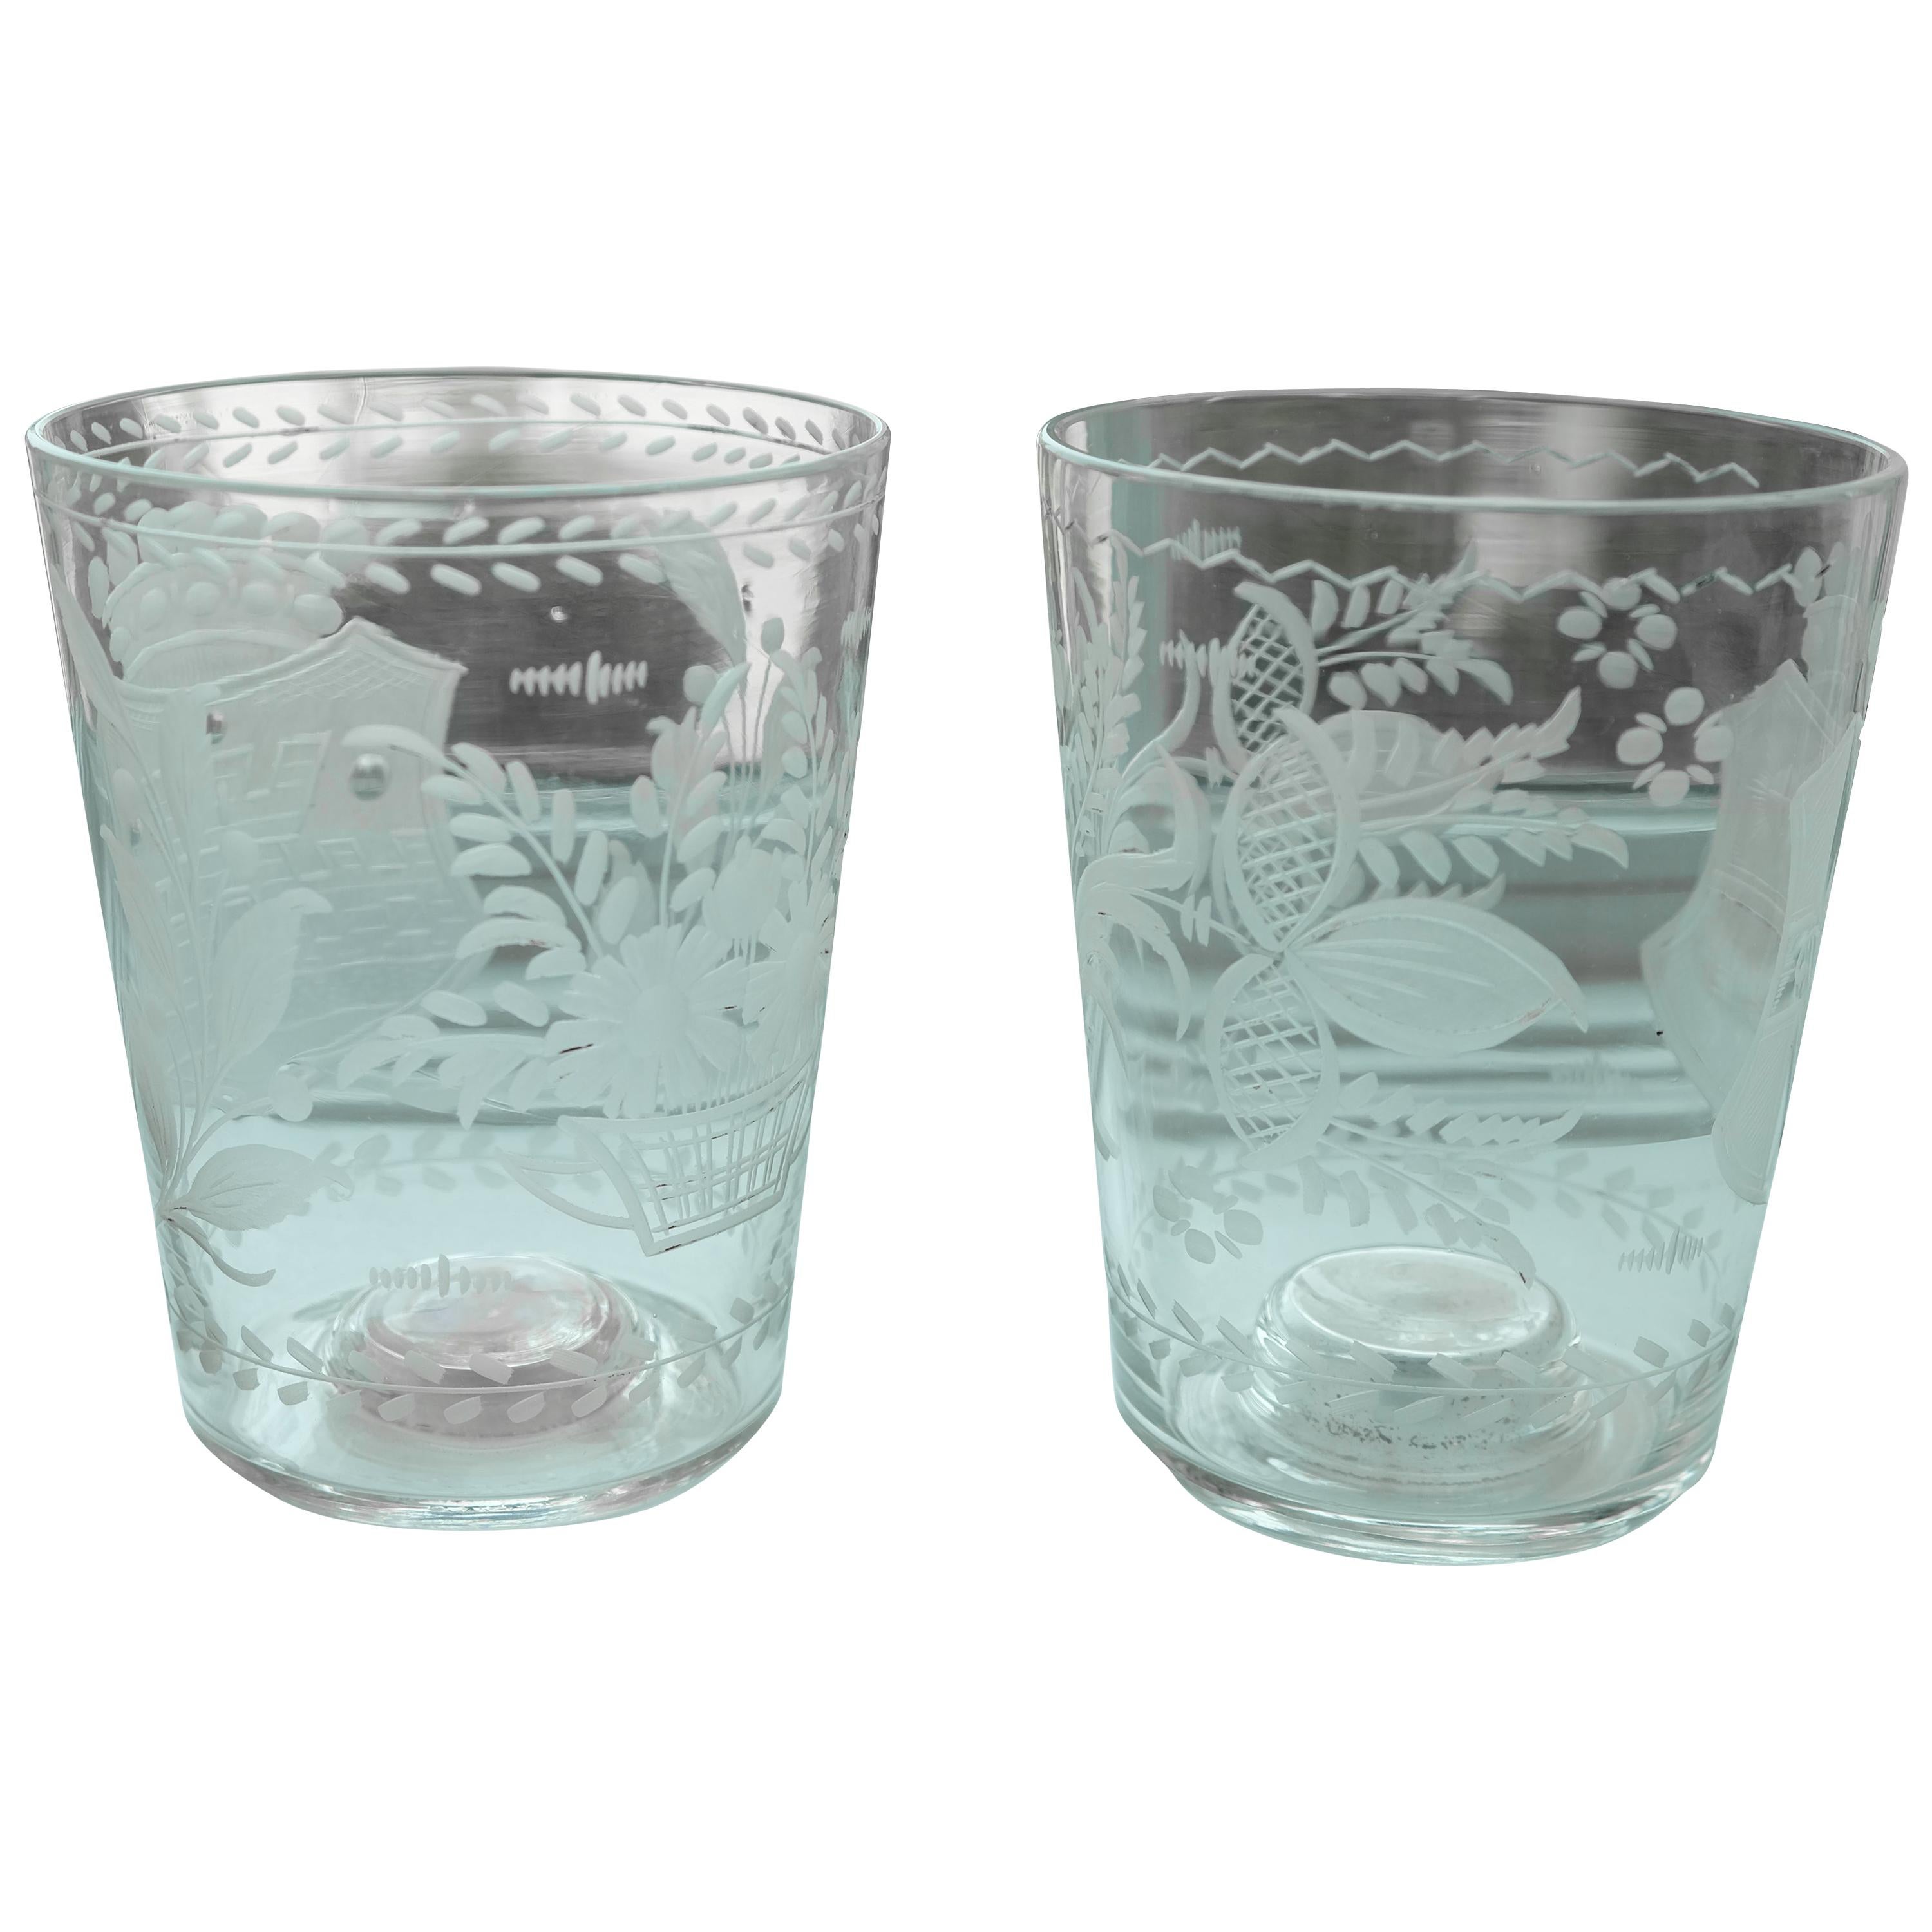 Pair of Engraved Armorial Beakers with Dice and Coin